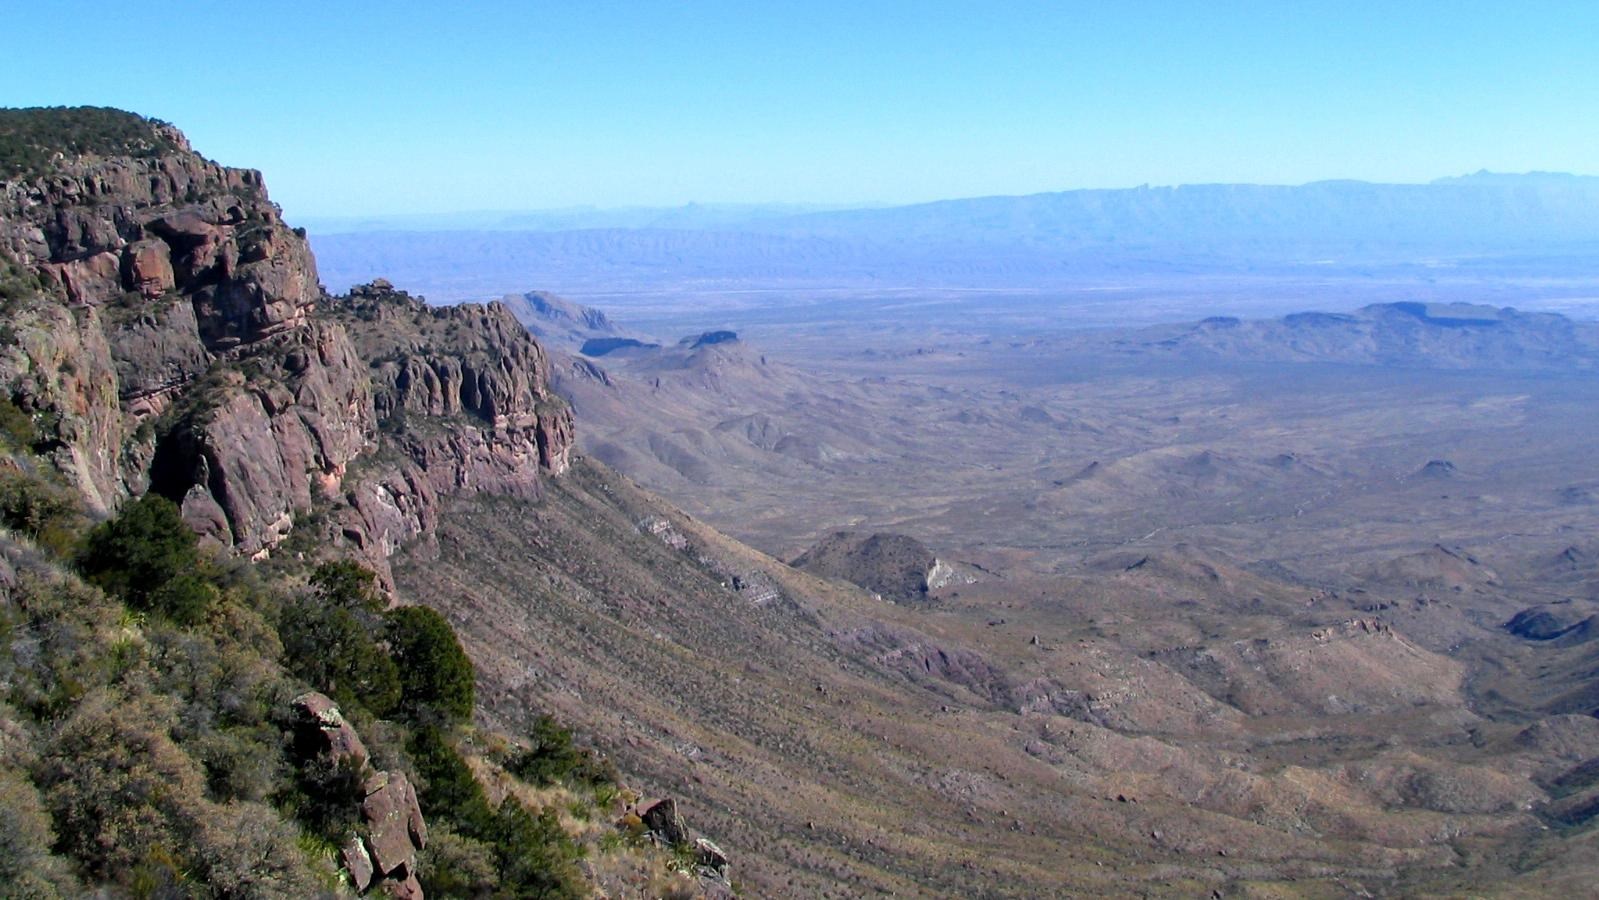 A view from the edge of a high cliff, looking down onto lower deserts and far away mountains.